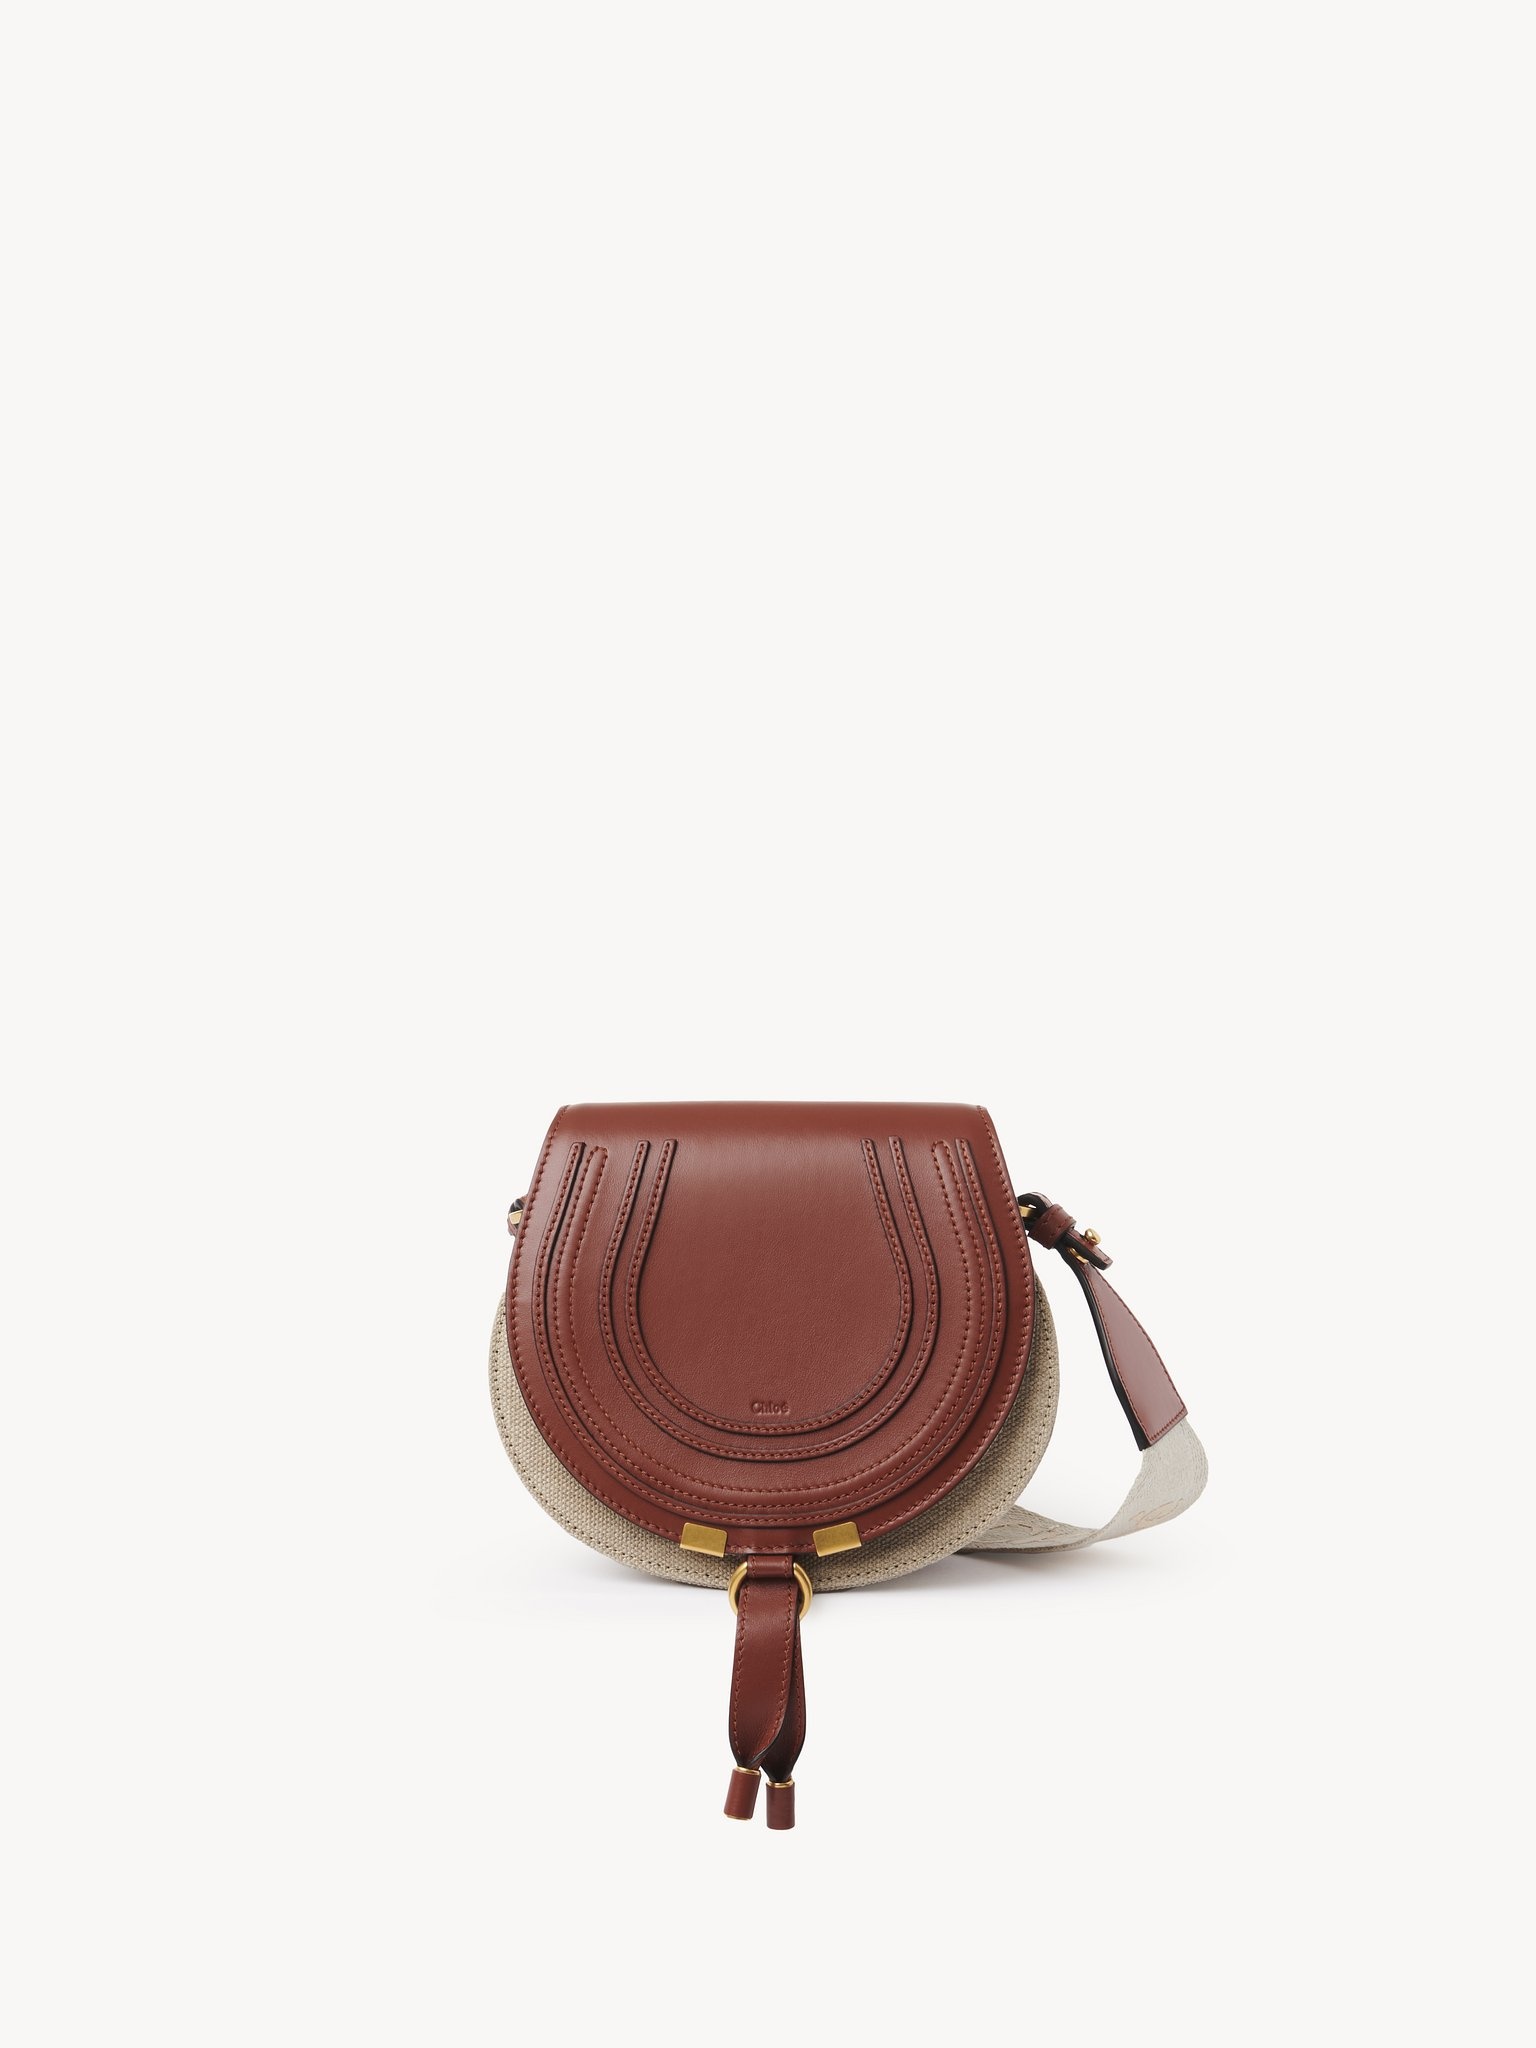 SMALL MARCIE SADDLE BAG IN LINEN & SMOOTH LEATHER - 1